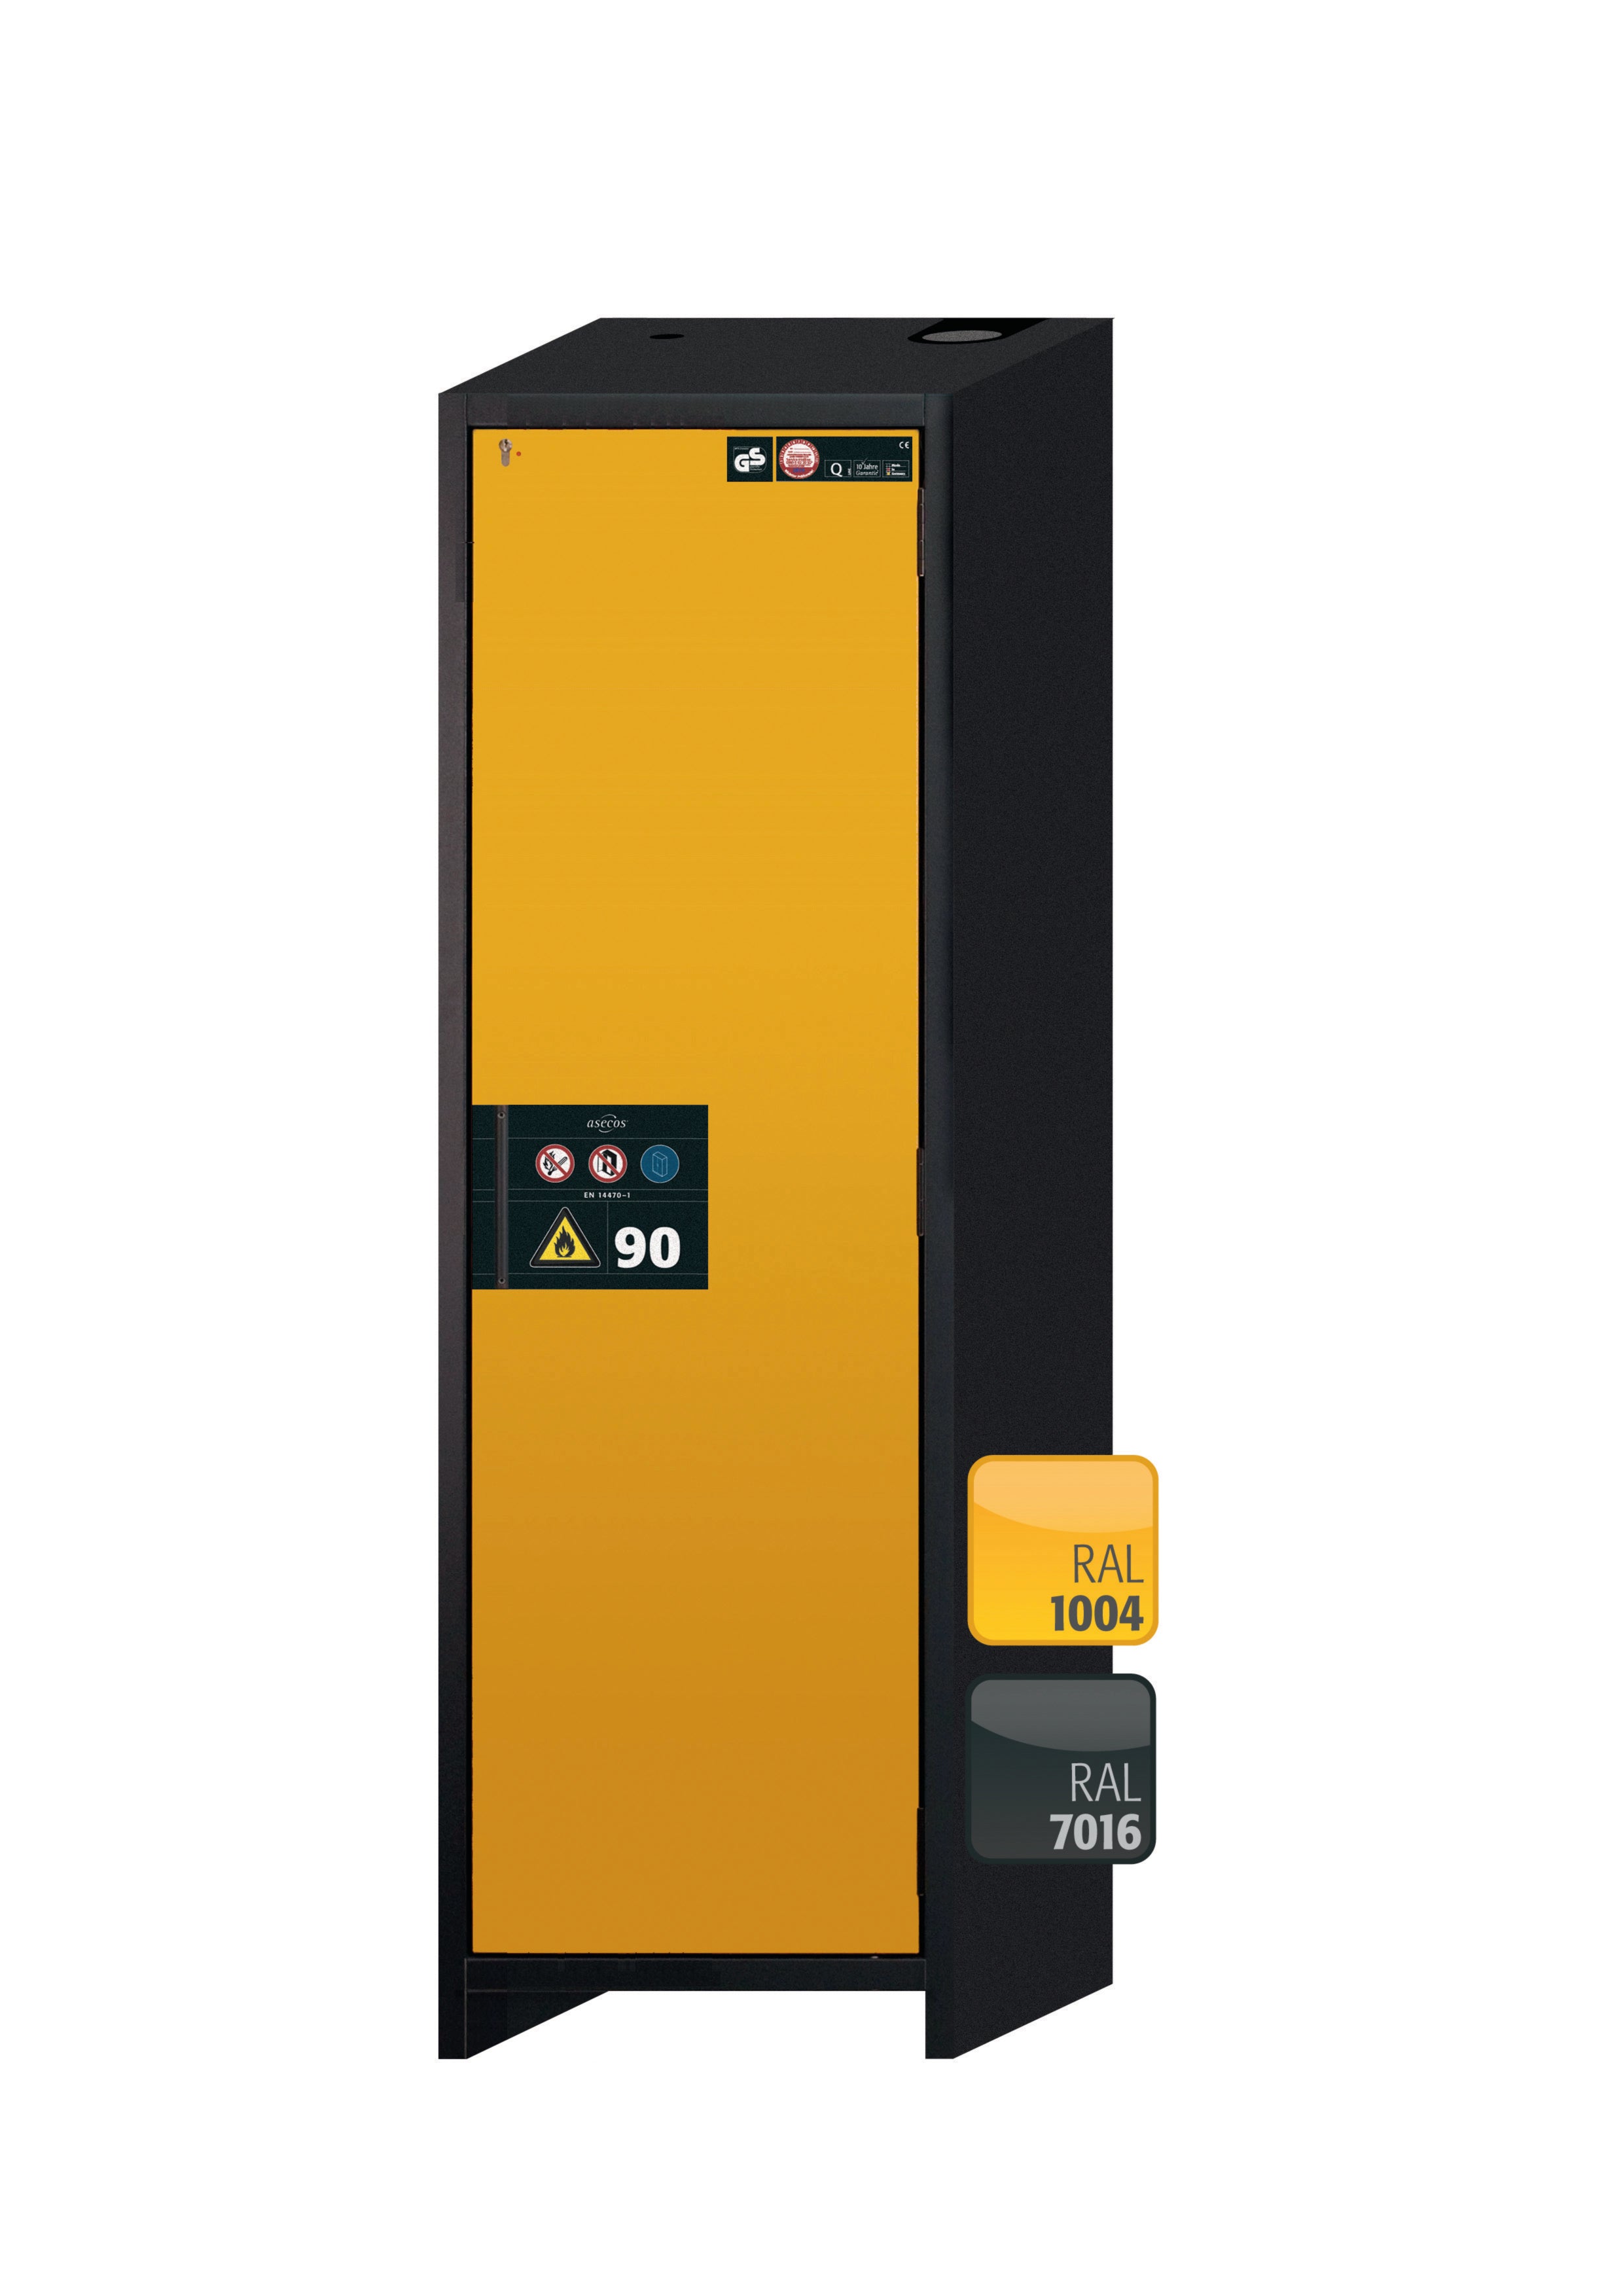 Type 90 safety storage cabinet Q-PEGASUS-90 model Q90.195.060.WDACR in warning yellow RAL 1004 with 2x drawer (standard) (stainless steel 1.4301),